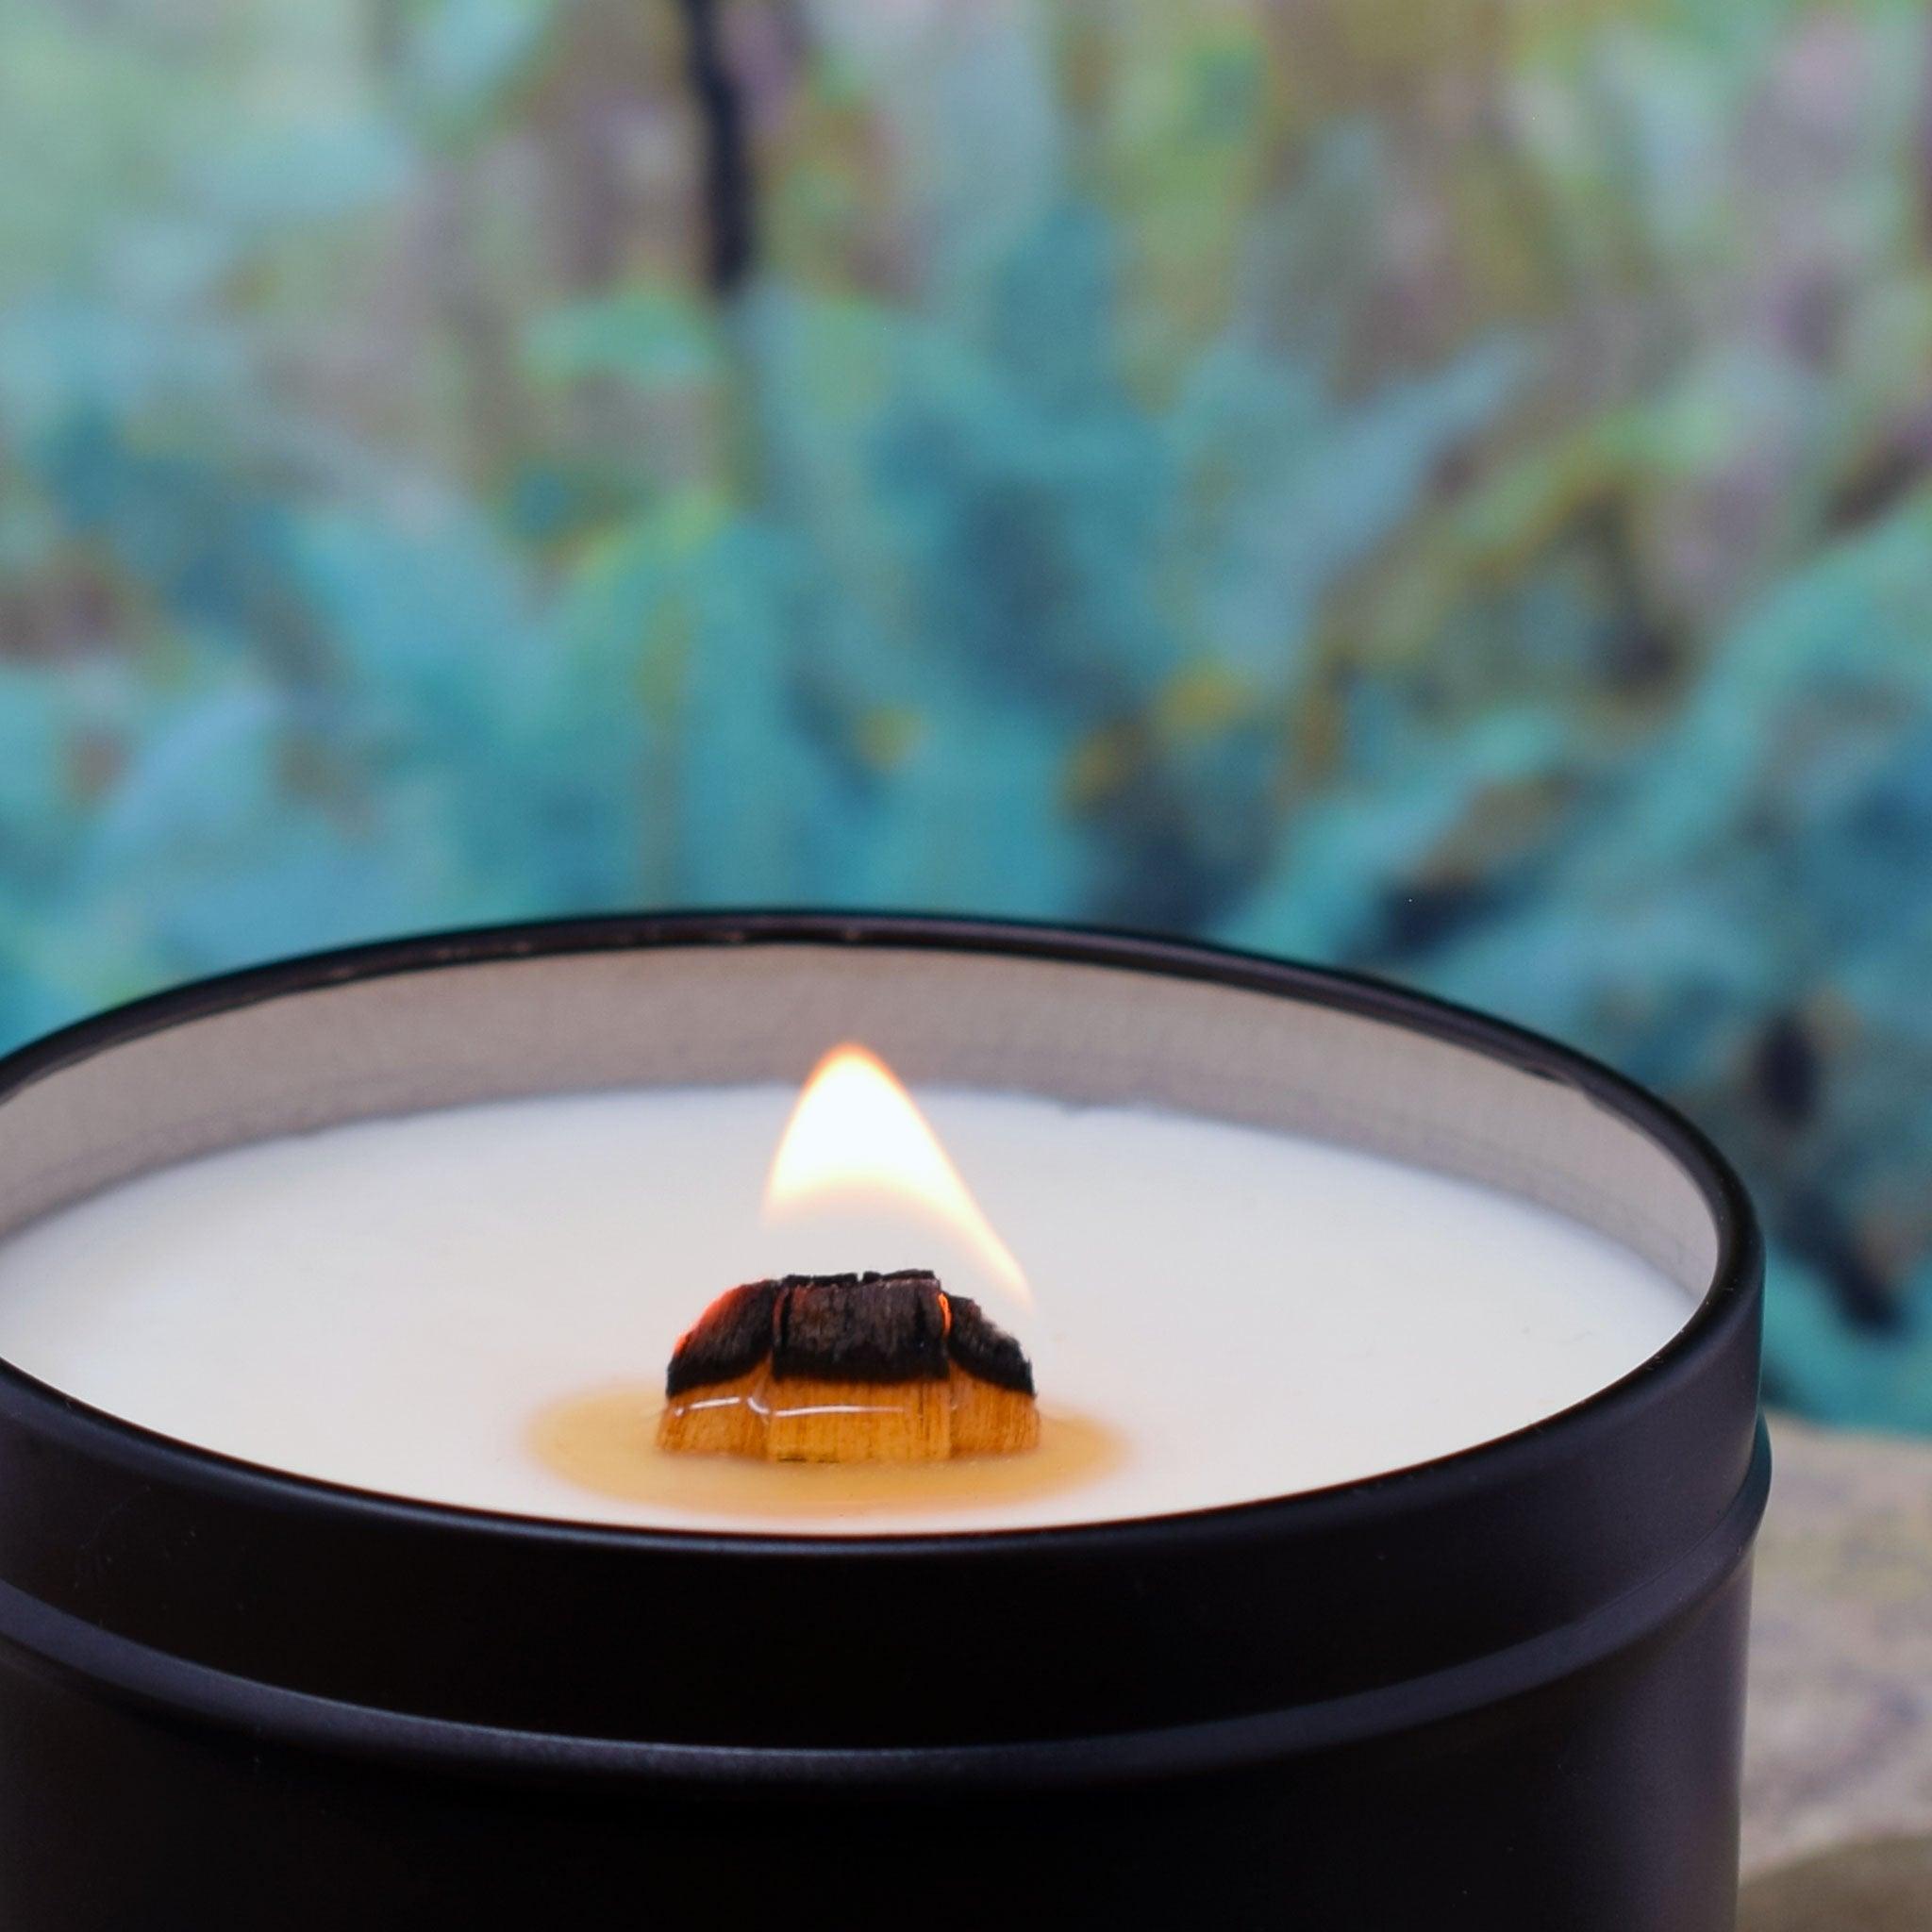 Matte Black Wood Wick Soy Candle